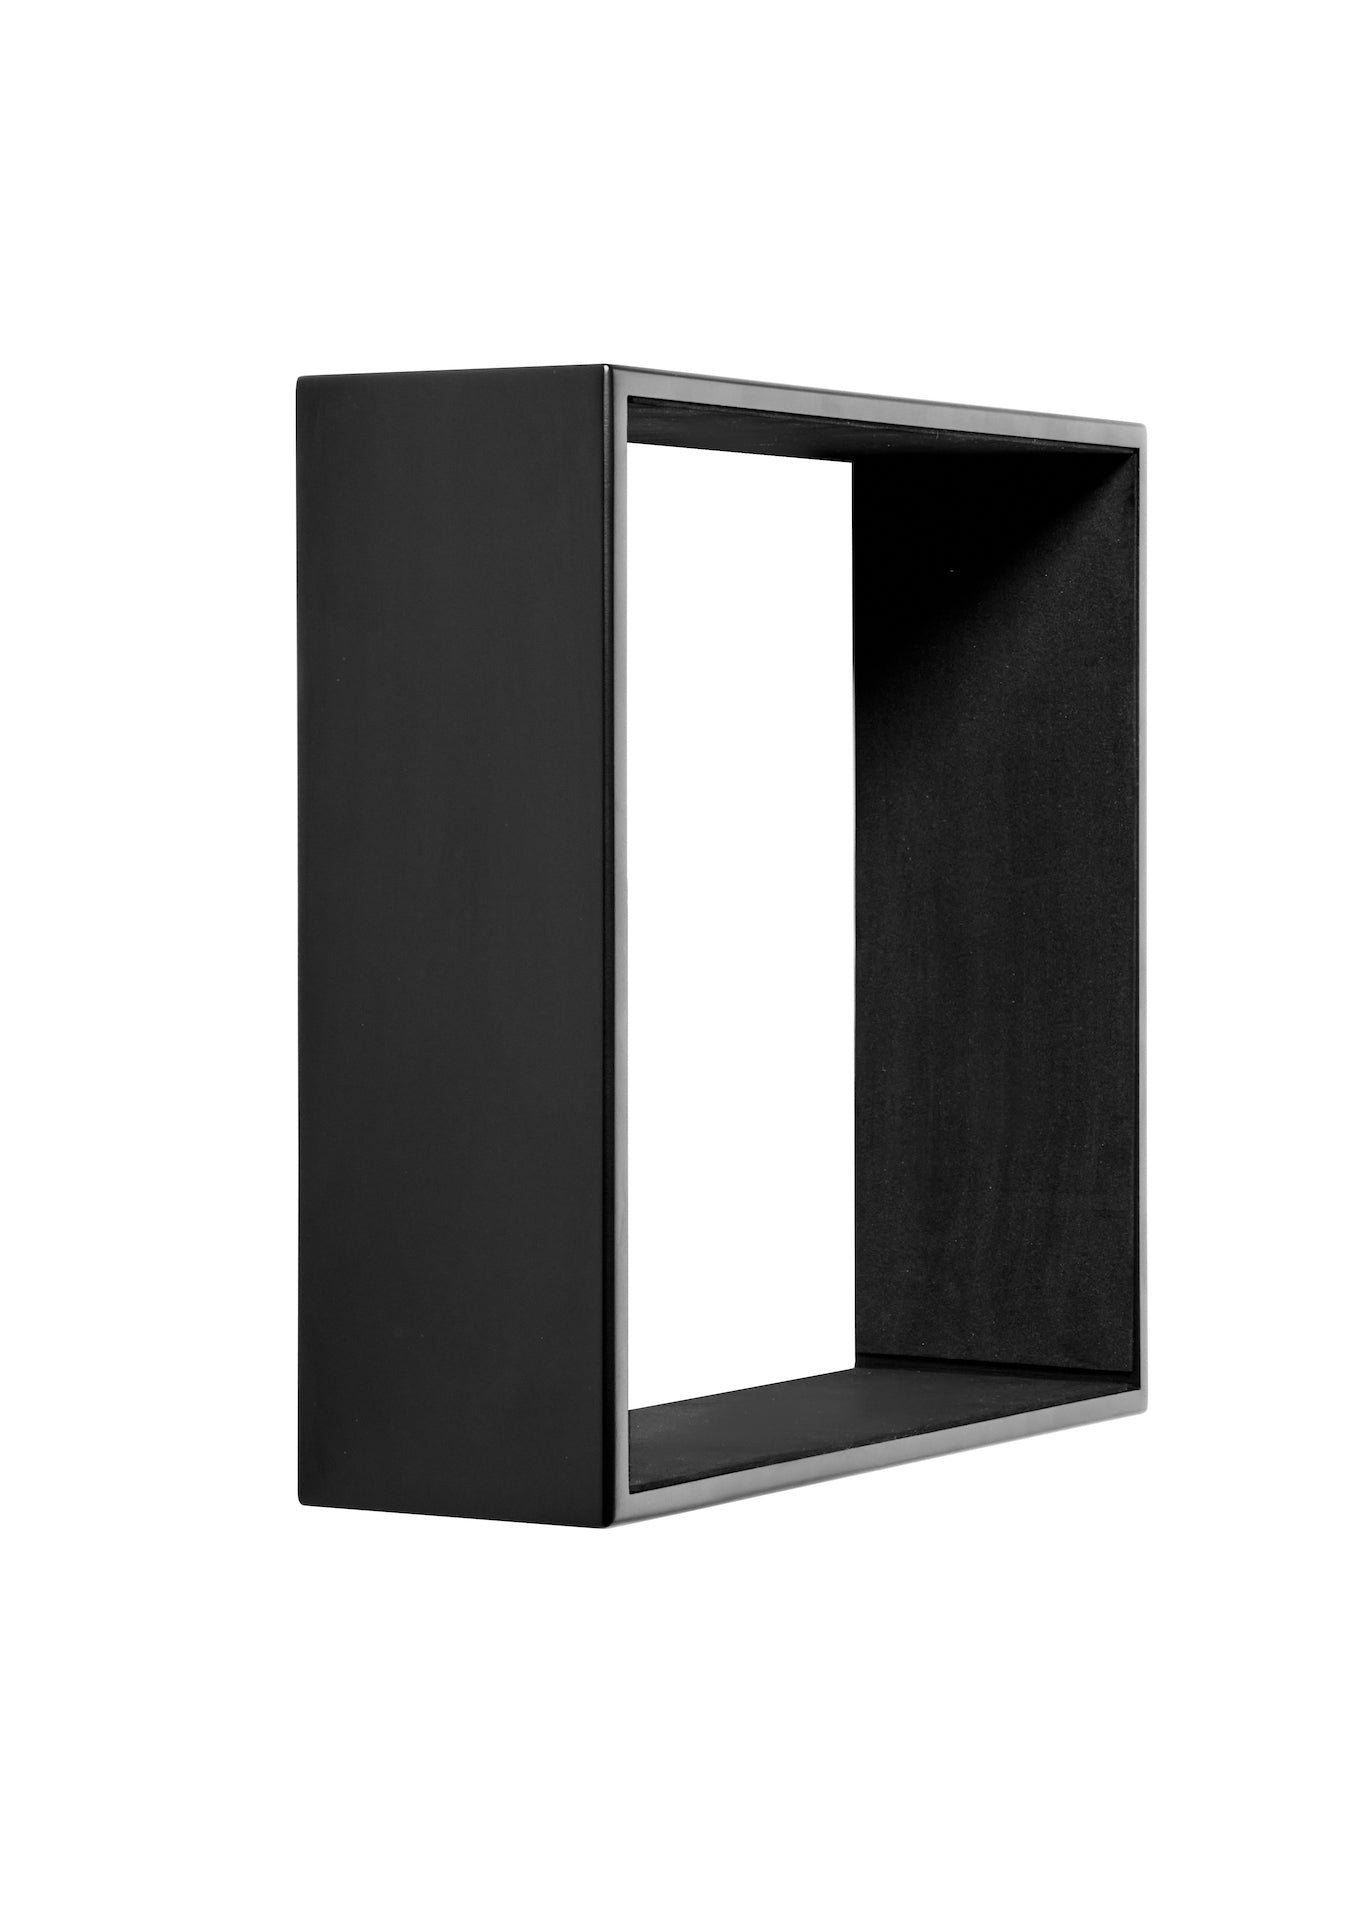 PMC On Wall Kit for ci series In-Wall Speakers